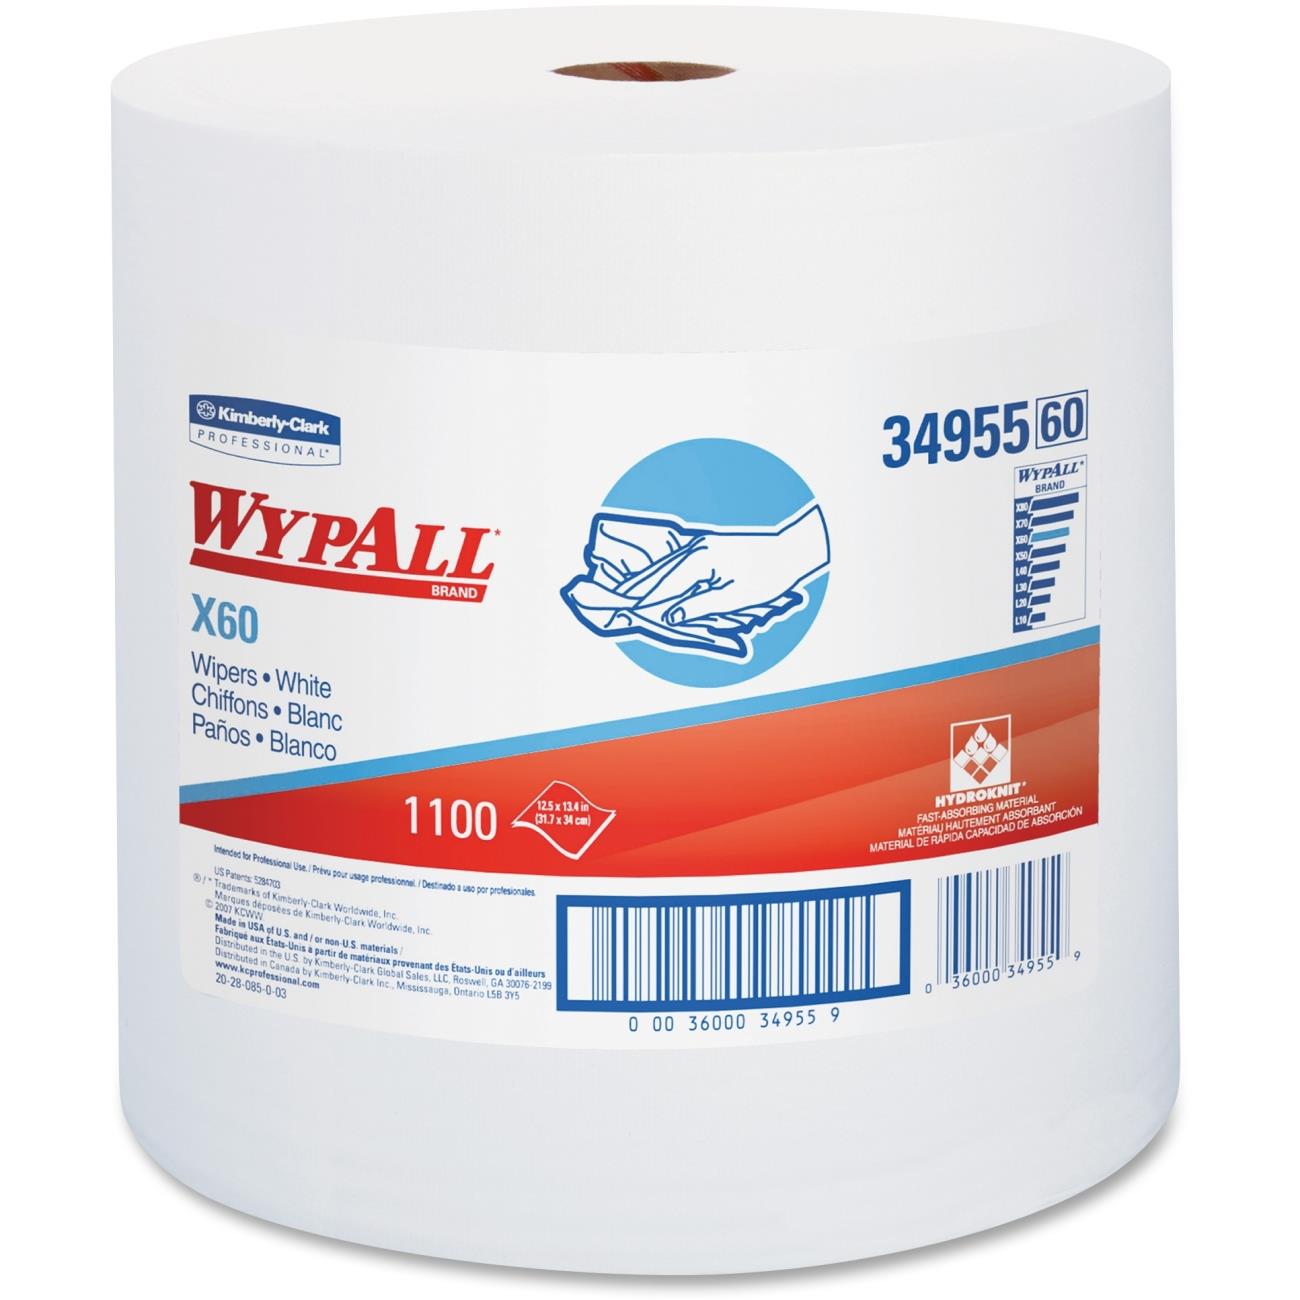 WYPALL X60 JUMBO ROLL WHITE 1100 WIPERS